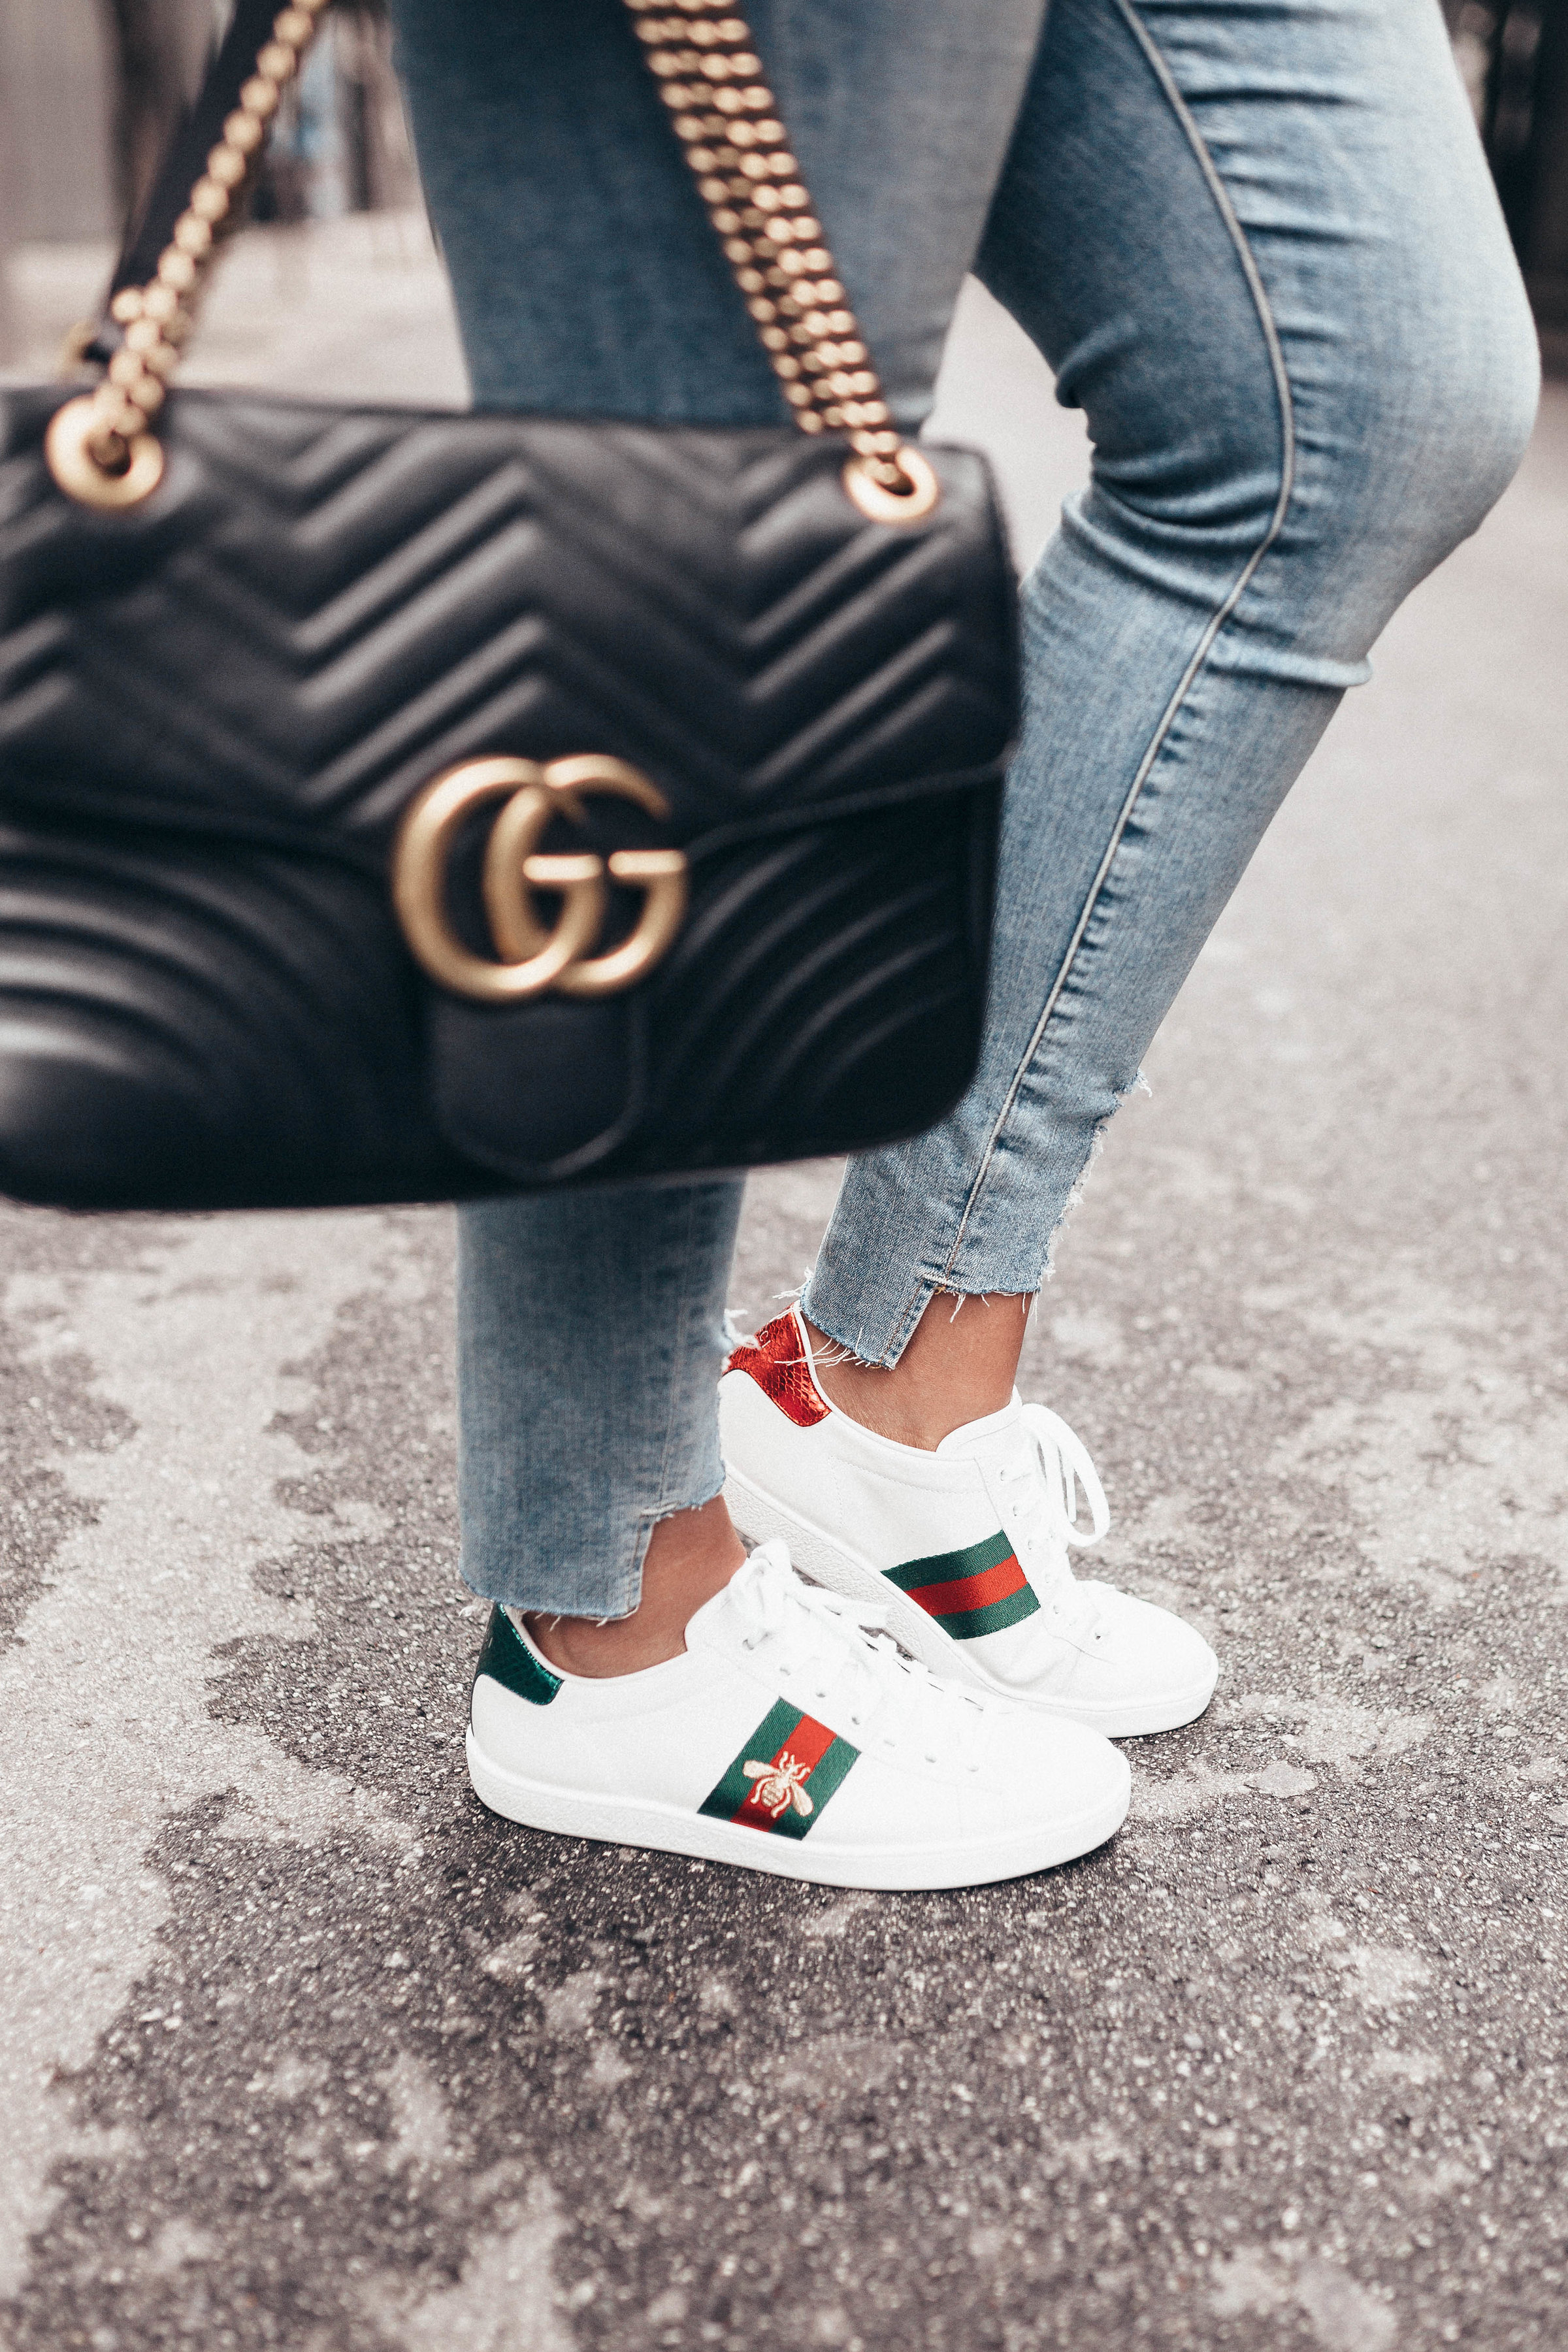 How To Clean Gucci Canvas Shoes 